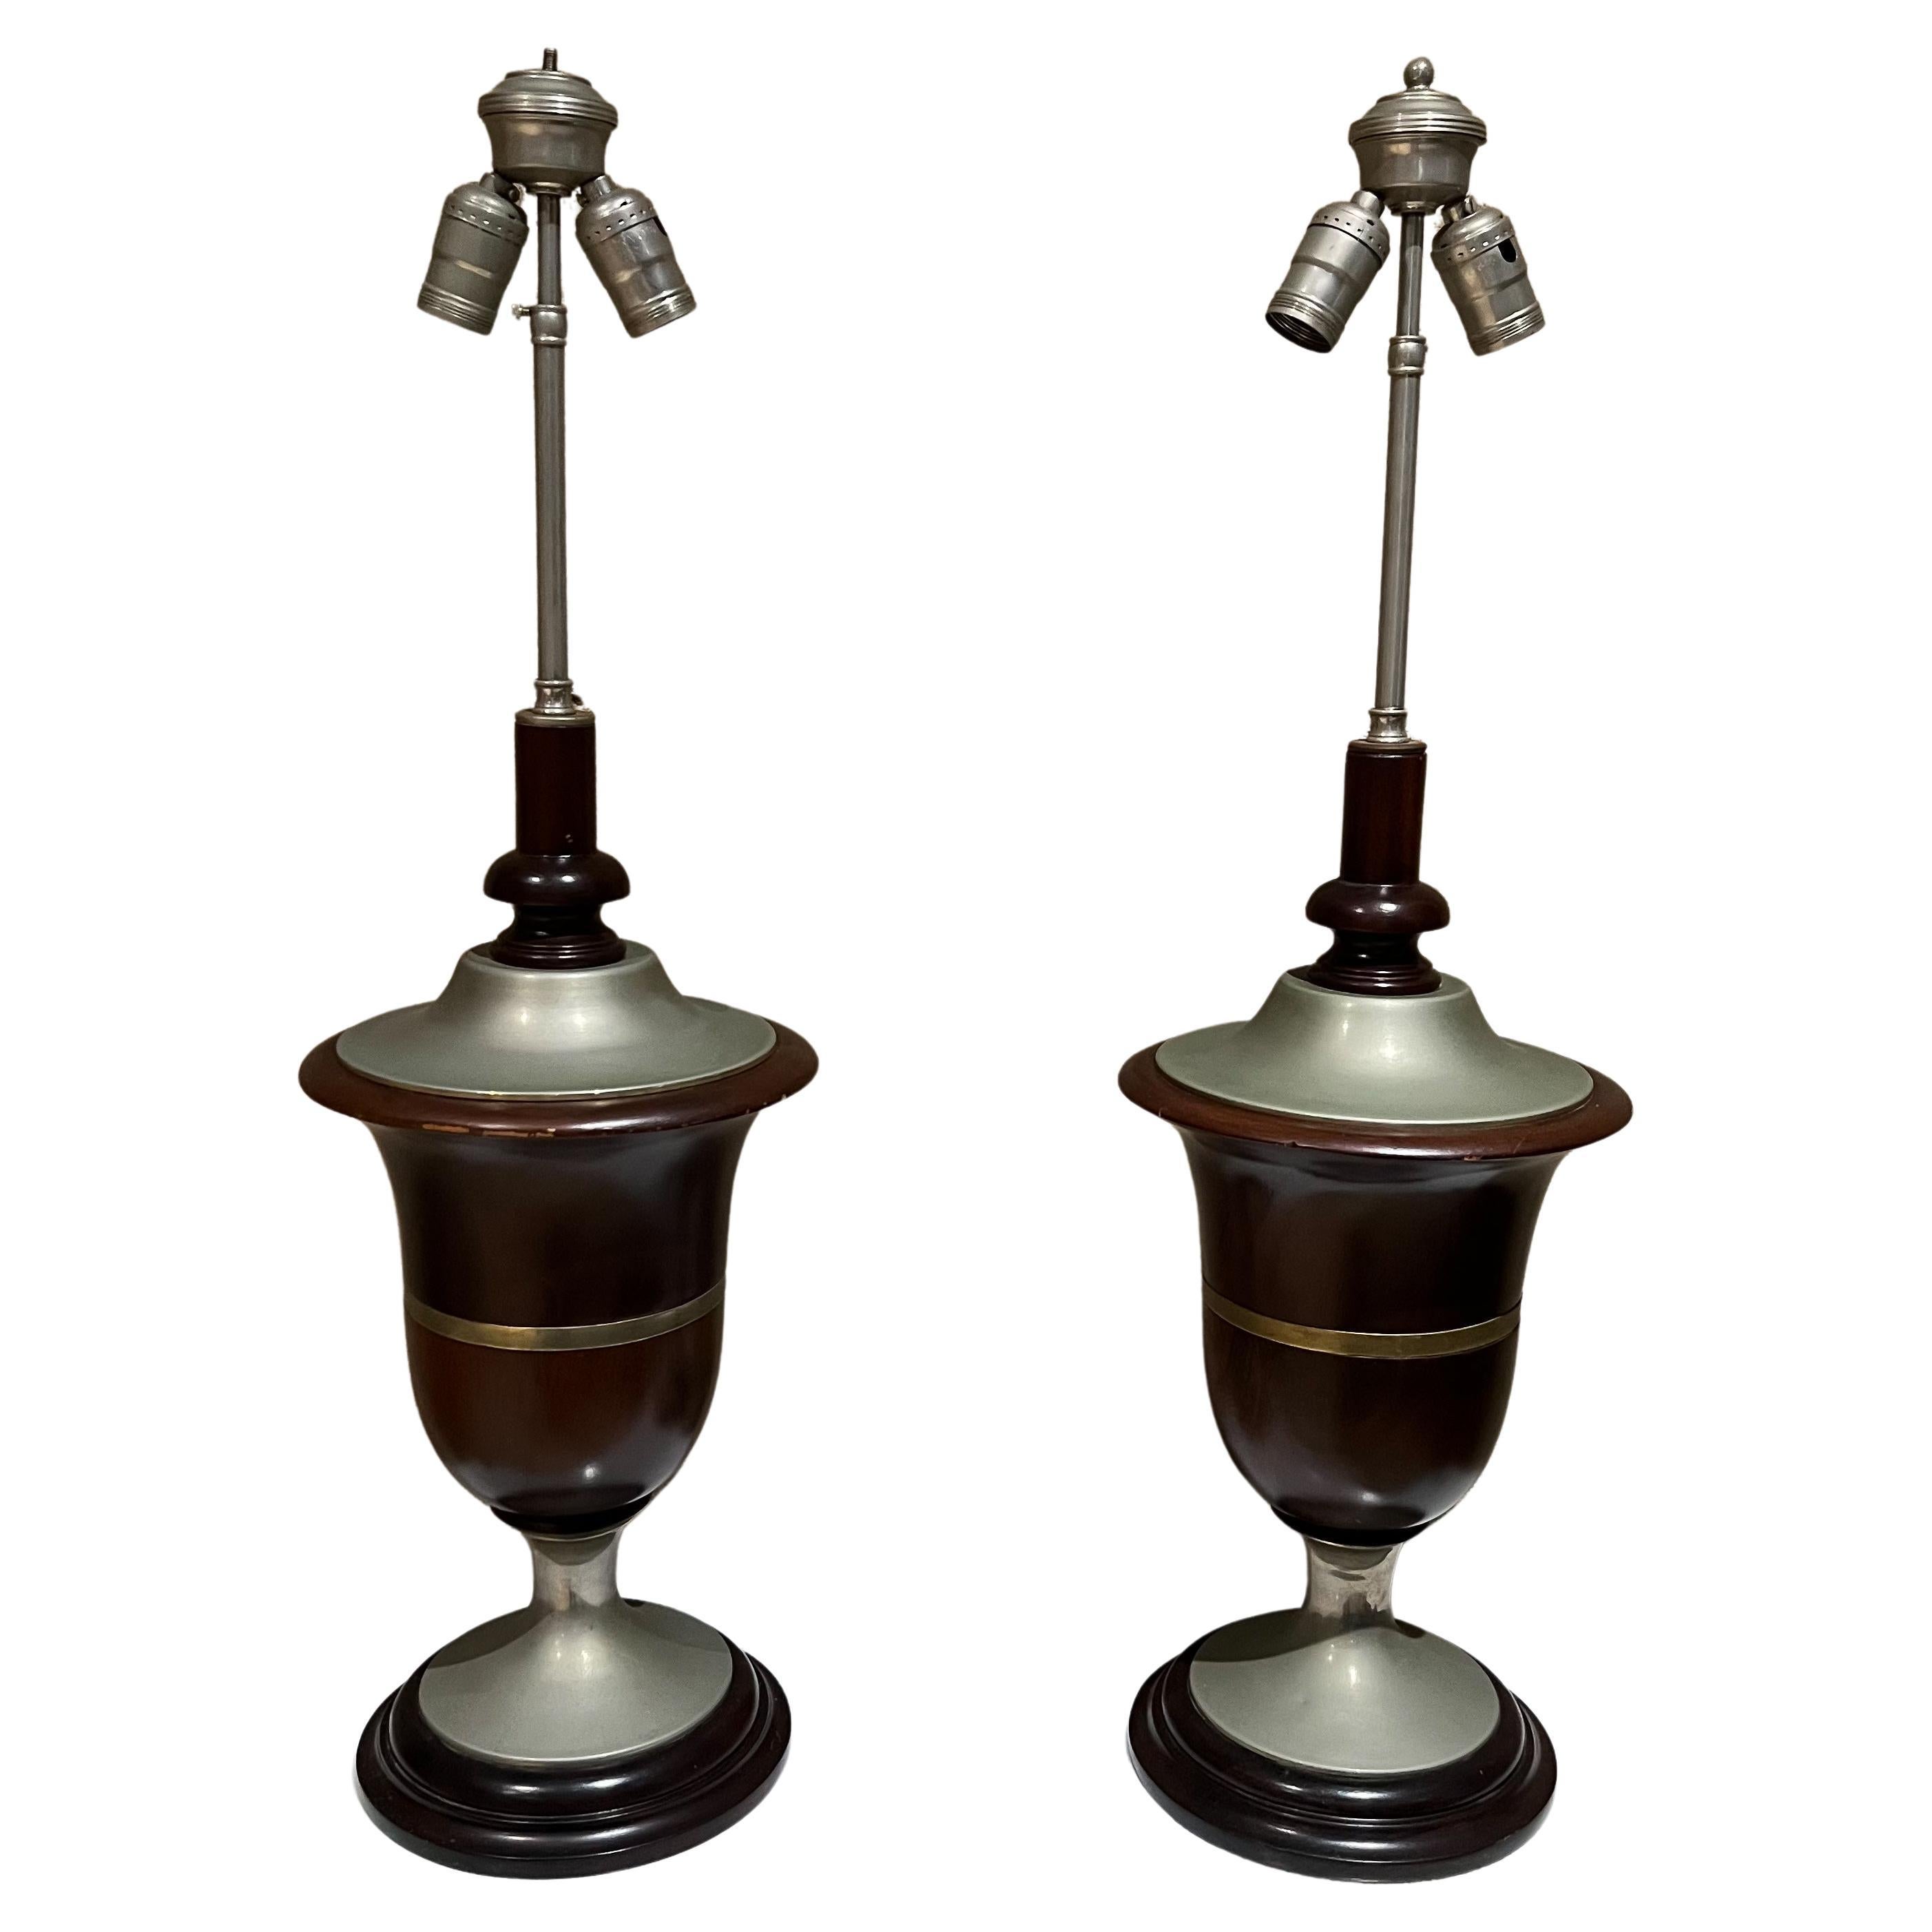 1940s Modernism Neoclassical Mexican Mahogany Table Lamps Style Luis Barragan